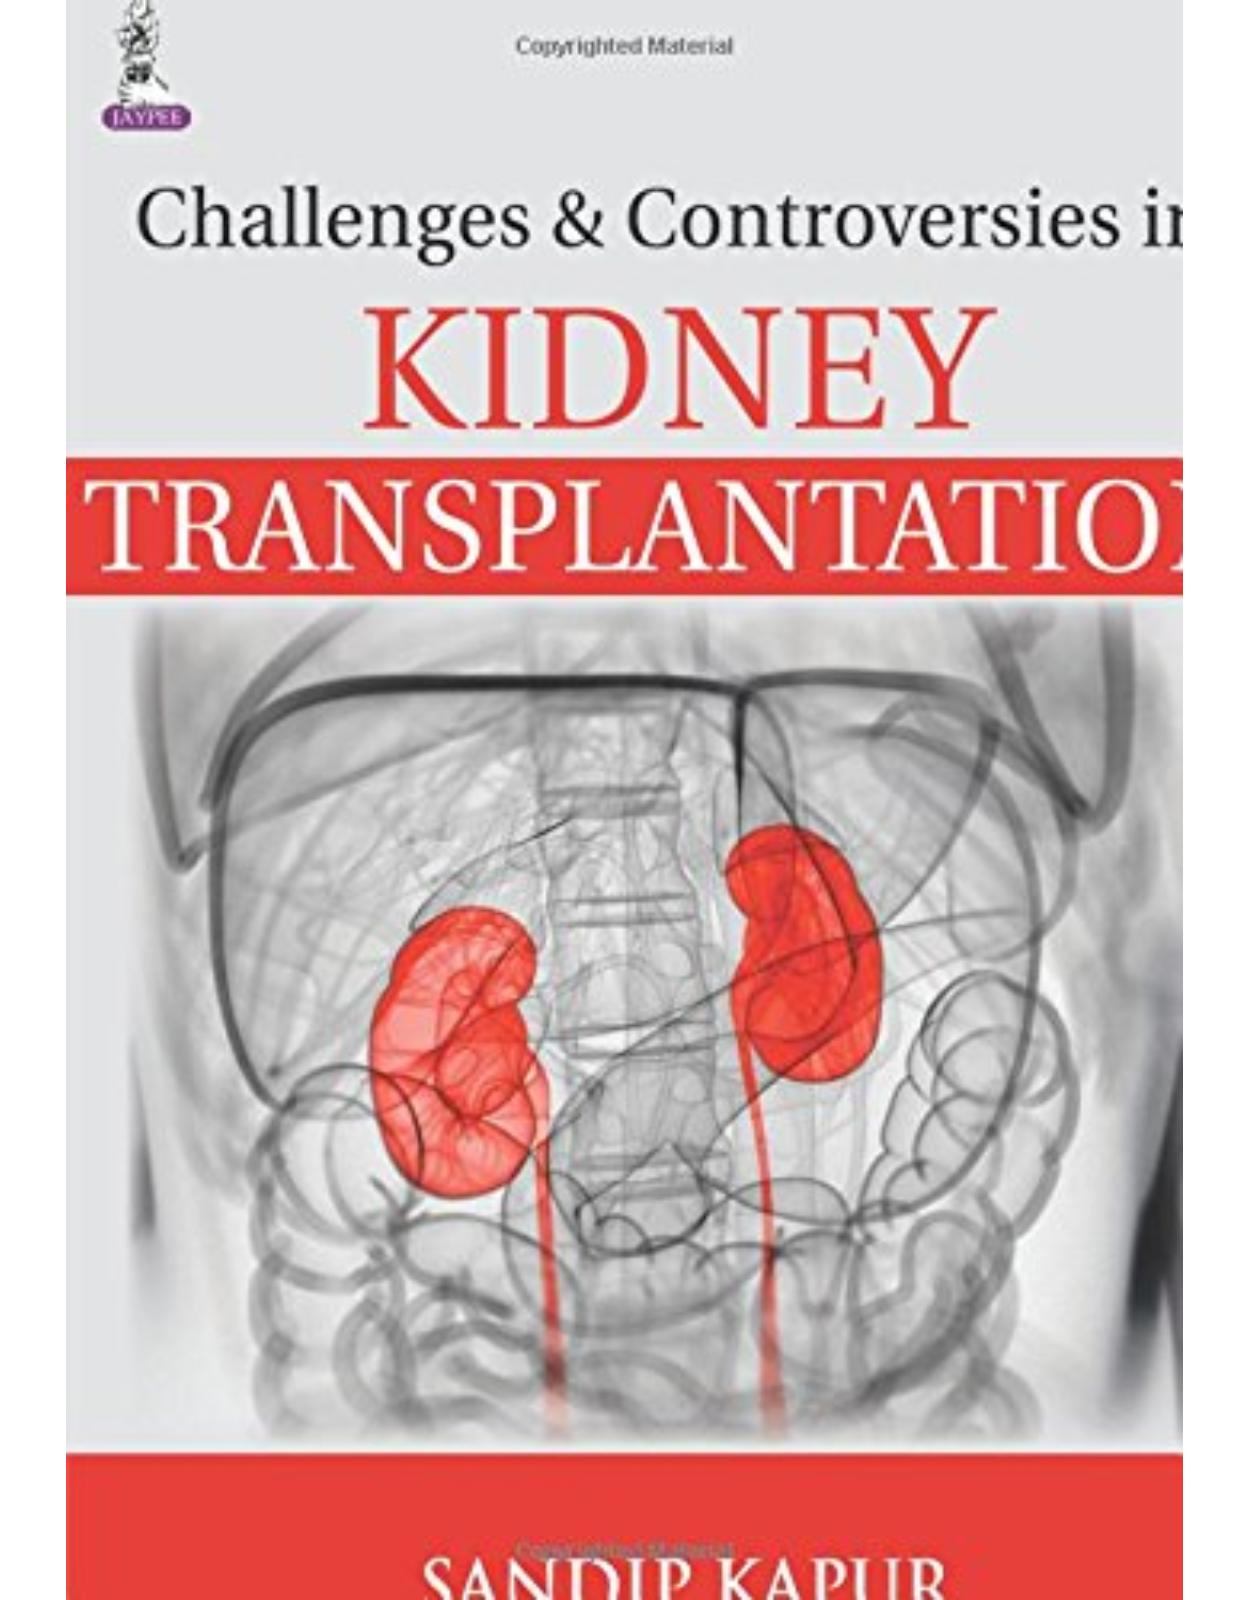 Challenges and Controversies in Kidney Transplantation